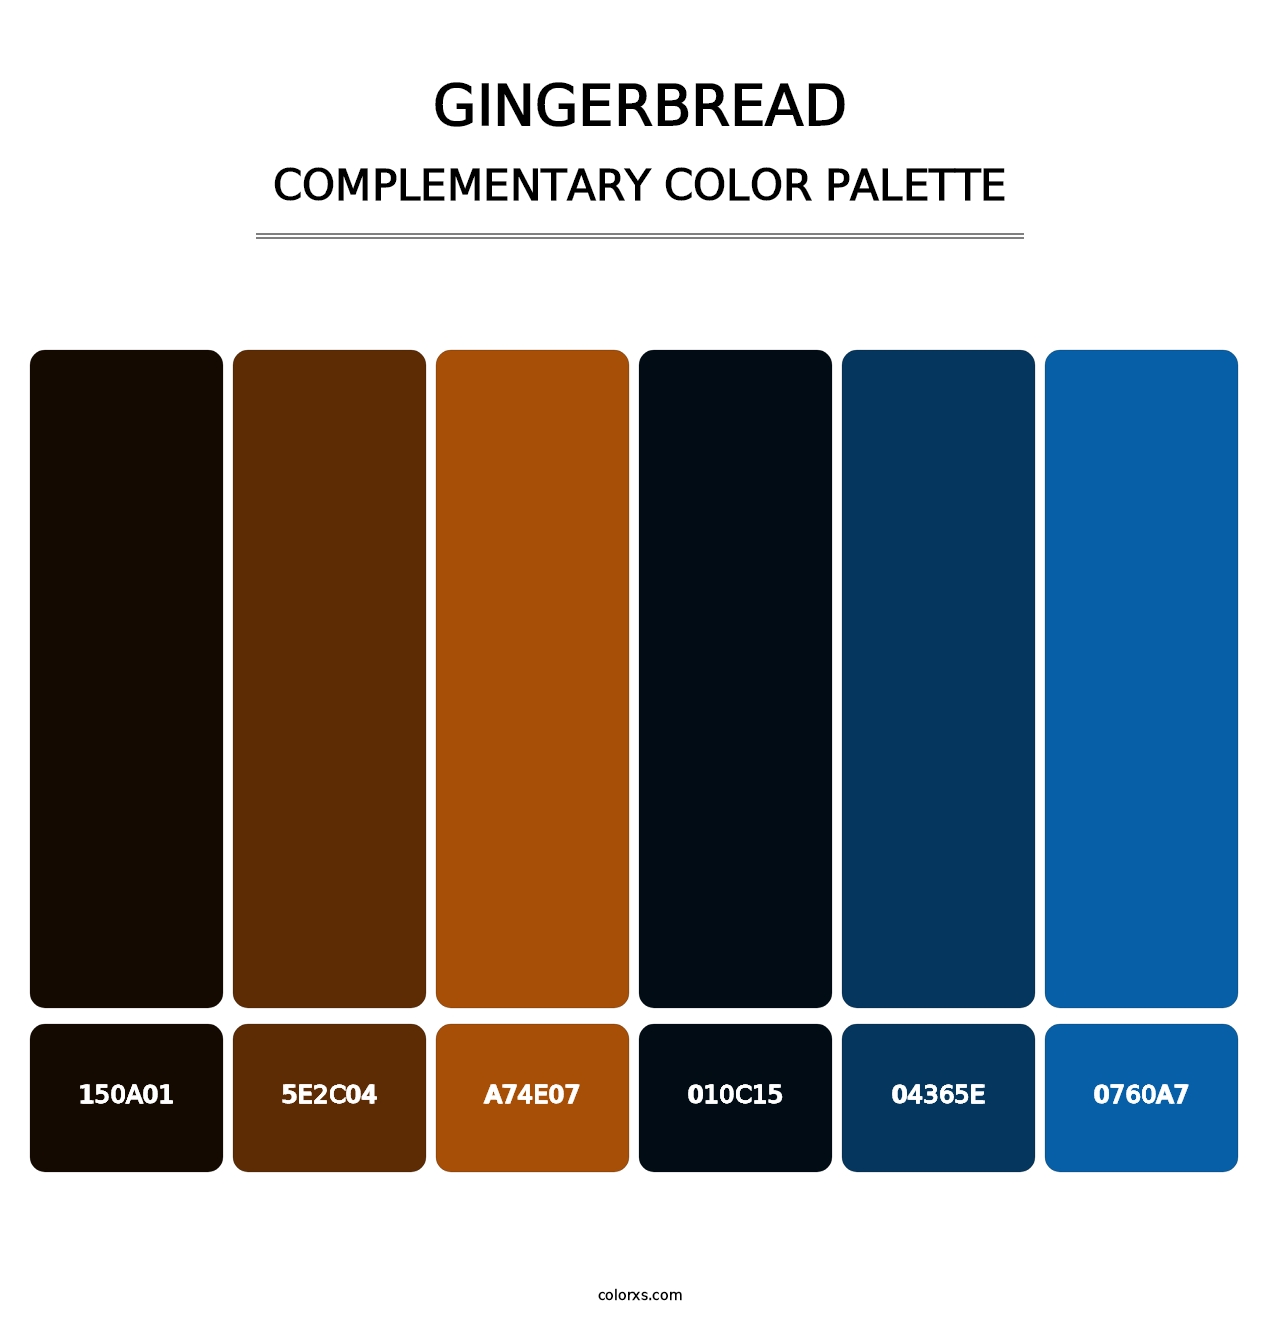 Gingerbread - Complementary Color Palette